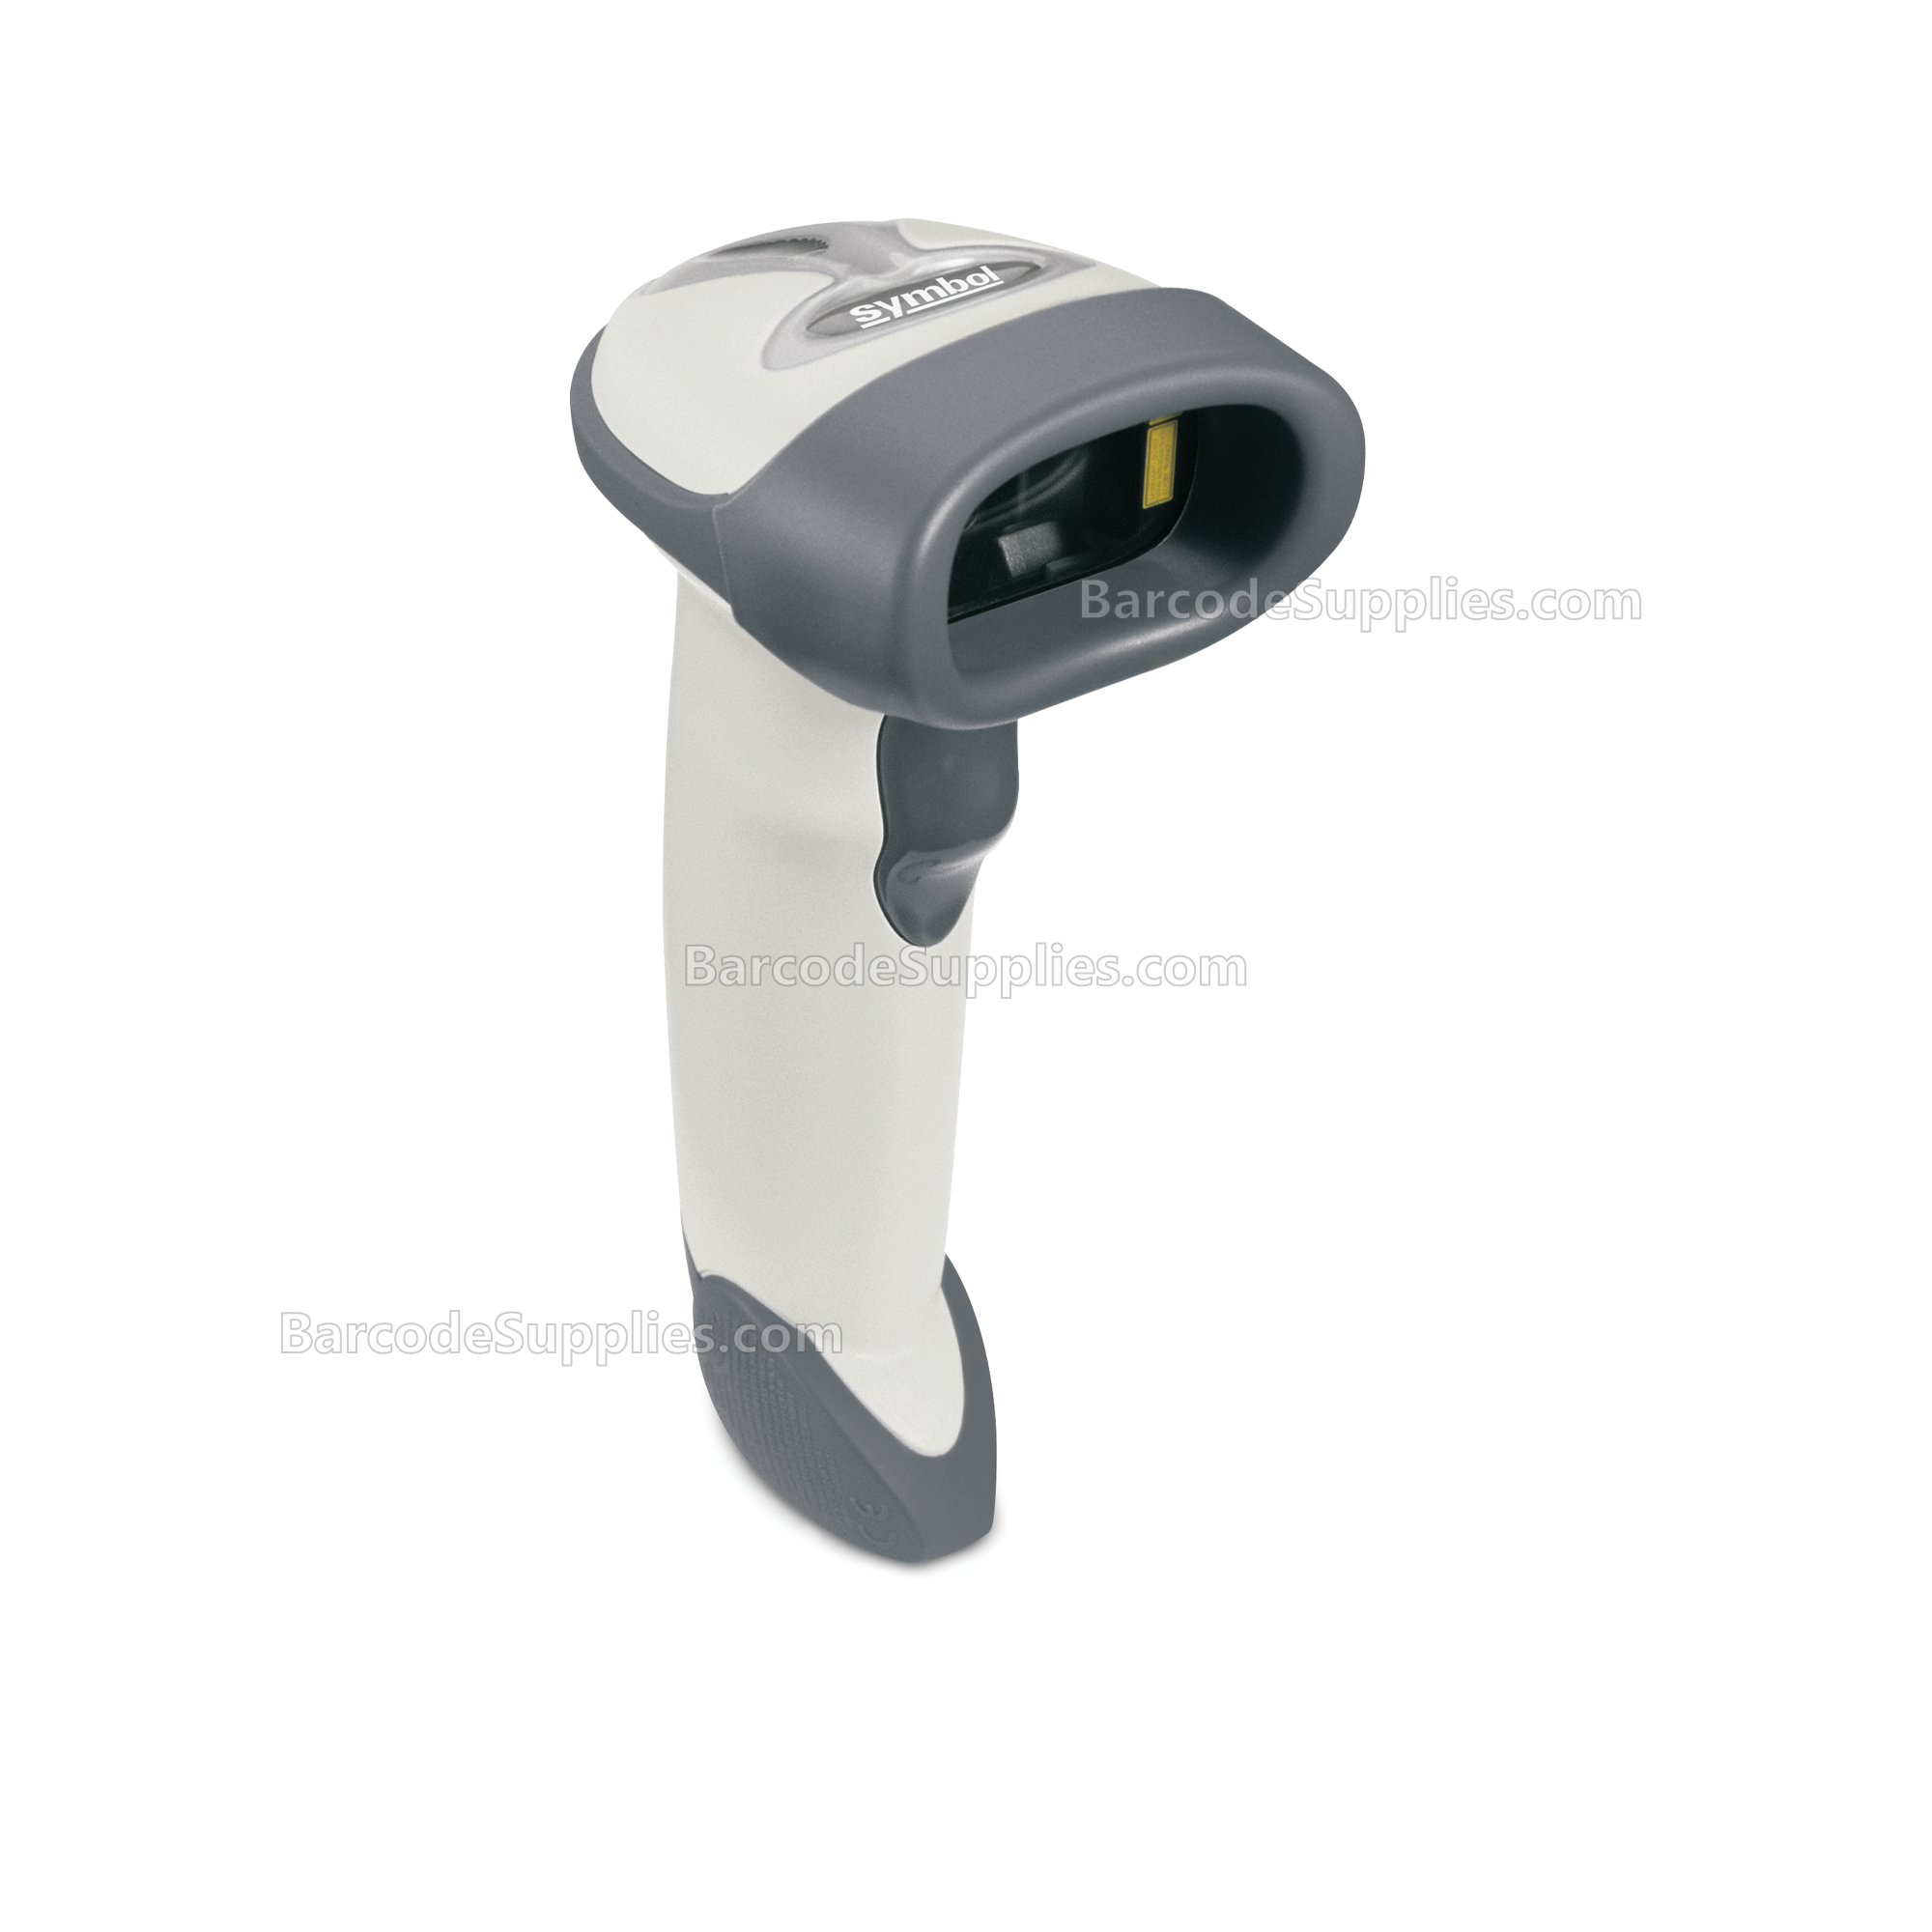 Products LS2208-SR White with Stand USB KIT - NA ONLY: LS2208-SR20001NA Scanner, CBA-U01-S07ZAR USB Cable, 20-61019-01R Stand